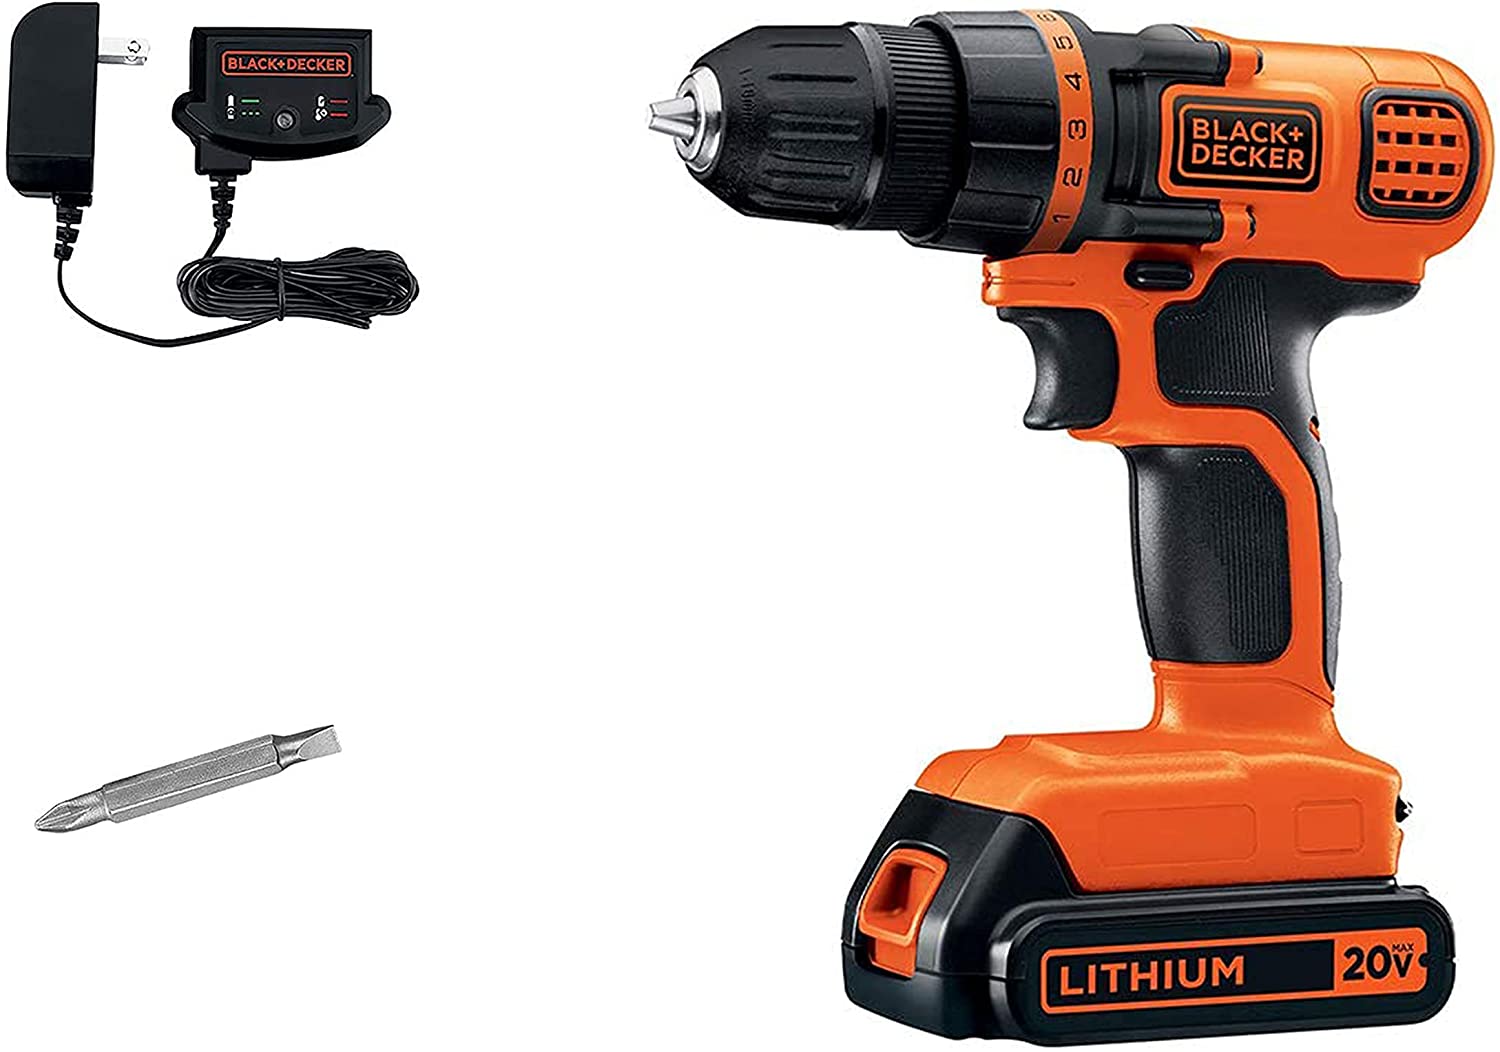 15 Tools Every First-Time Homeowner Needs